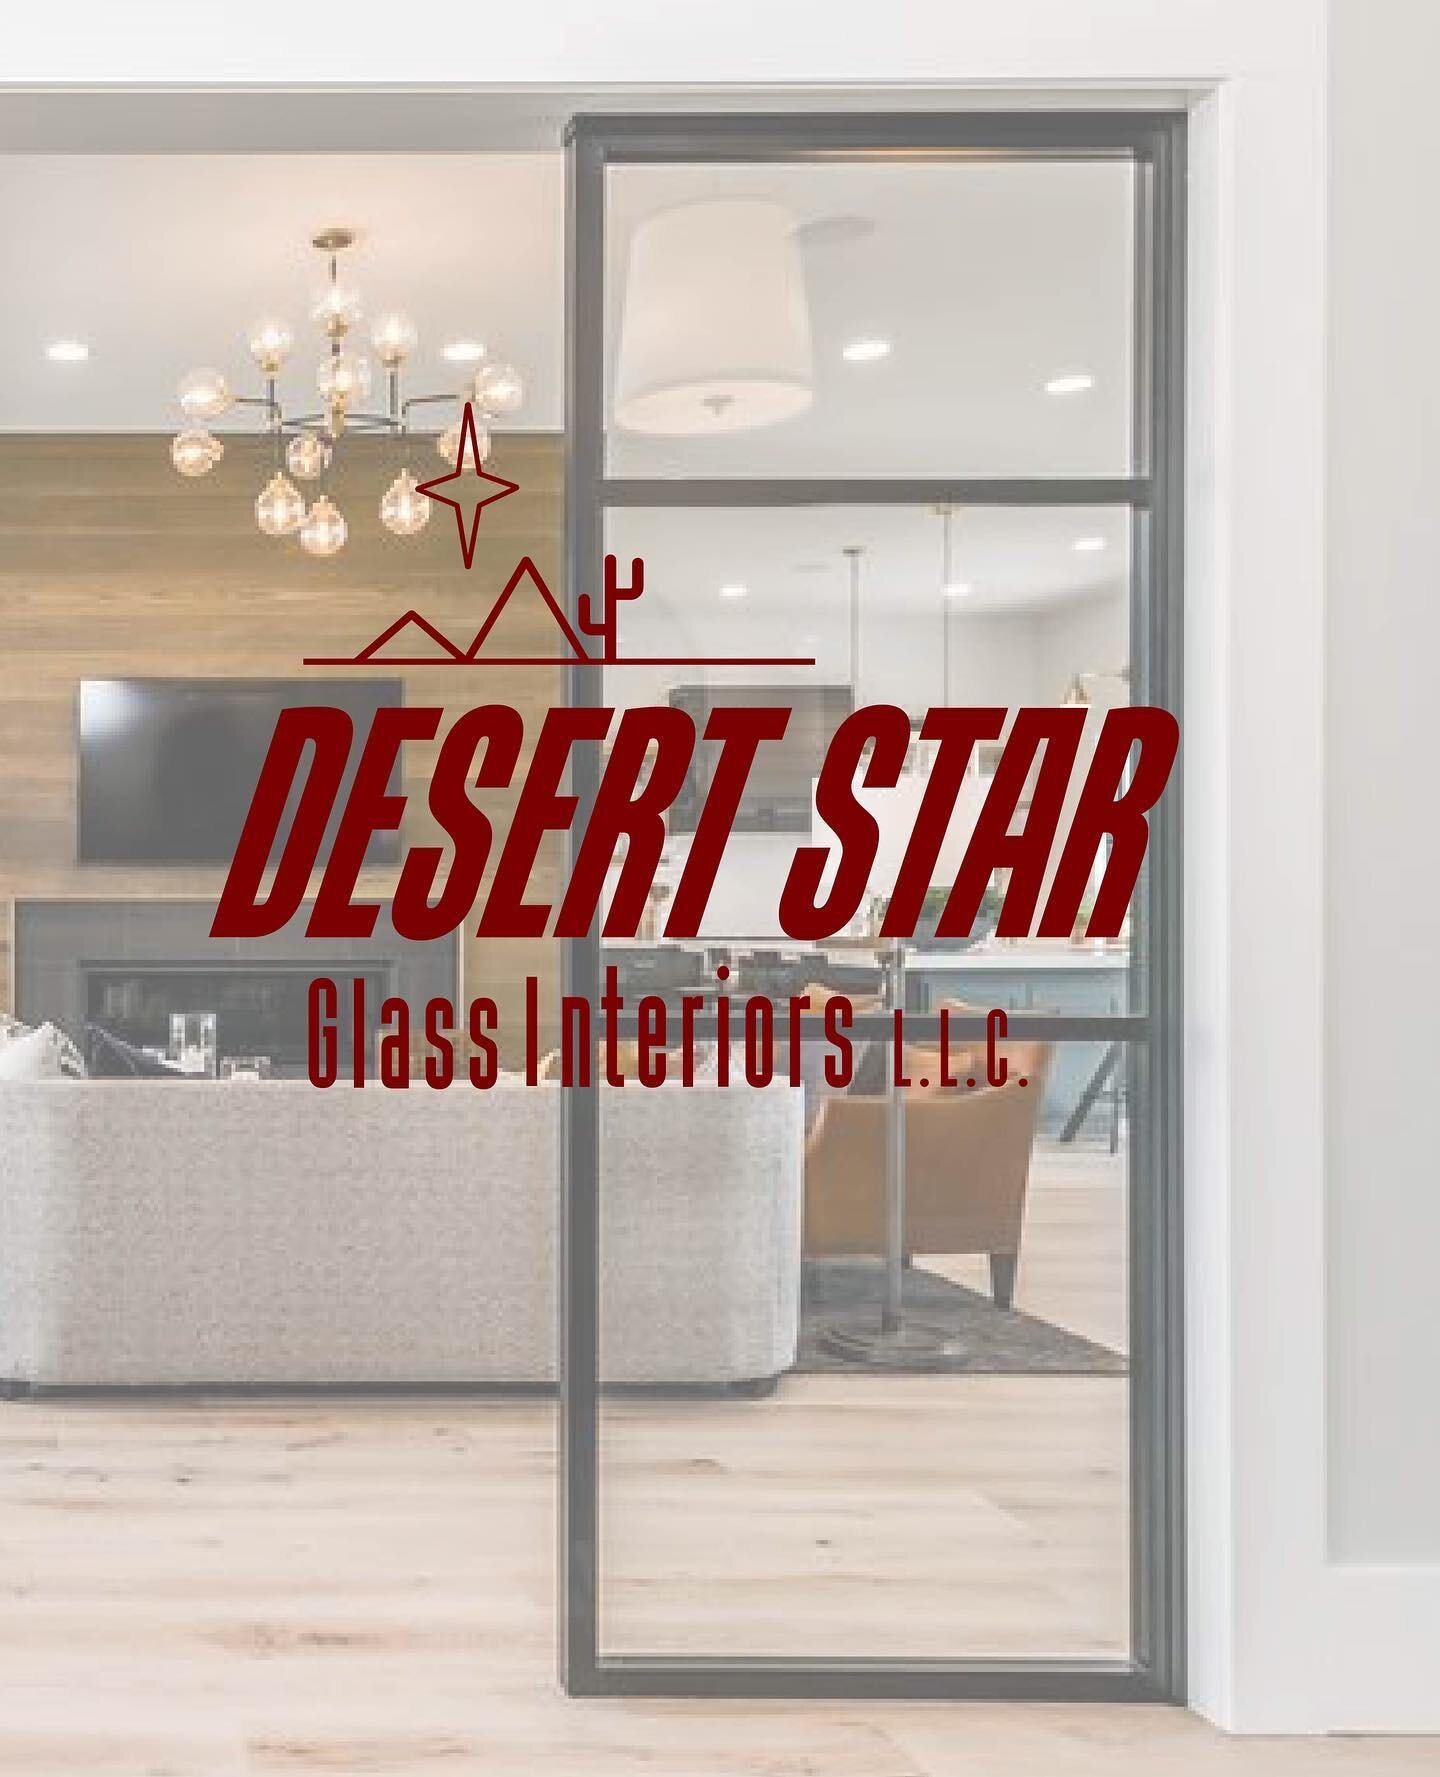 Desert Star Glass can render custom glass work for any type of space. They provide functional glass fabrications with an artistic approach.